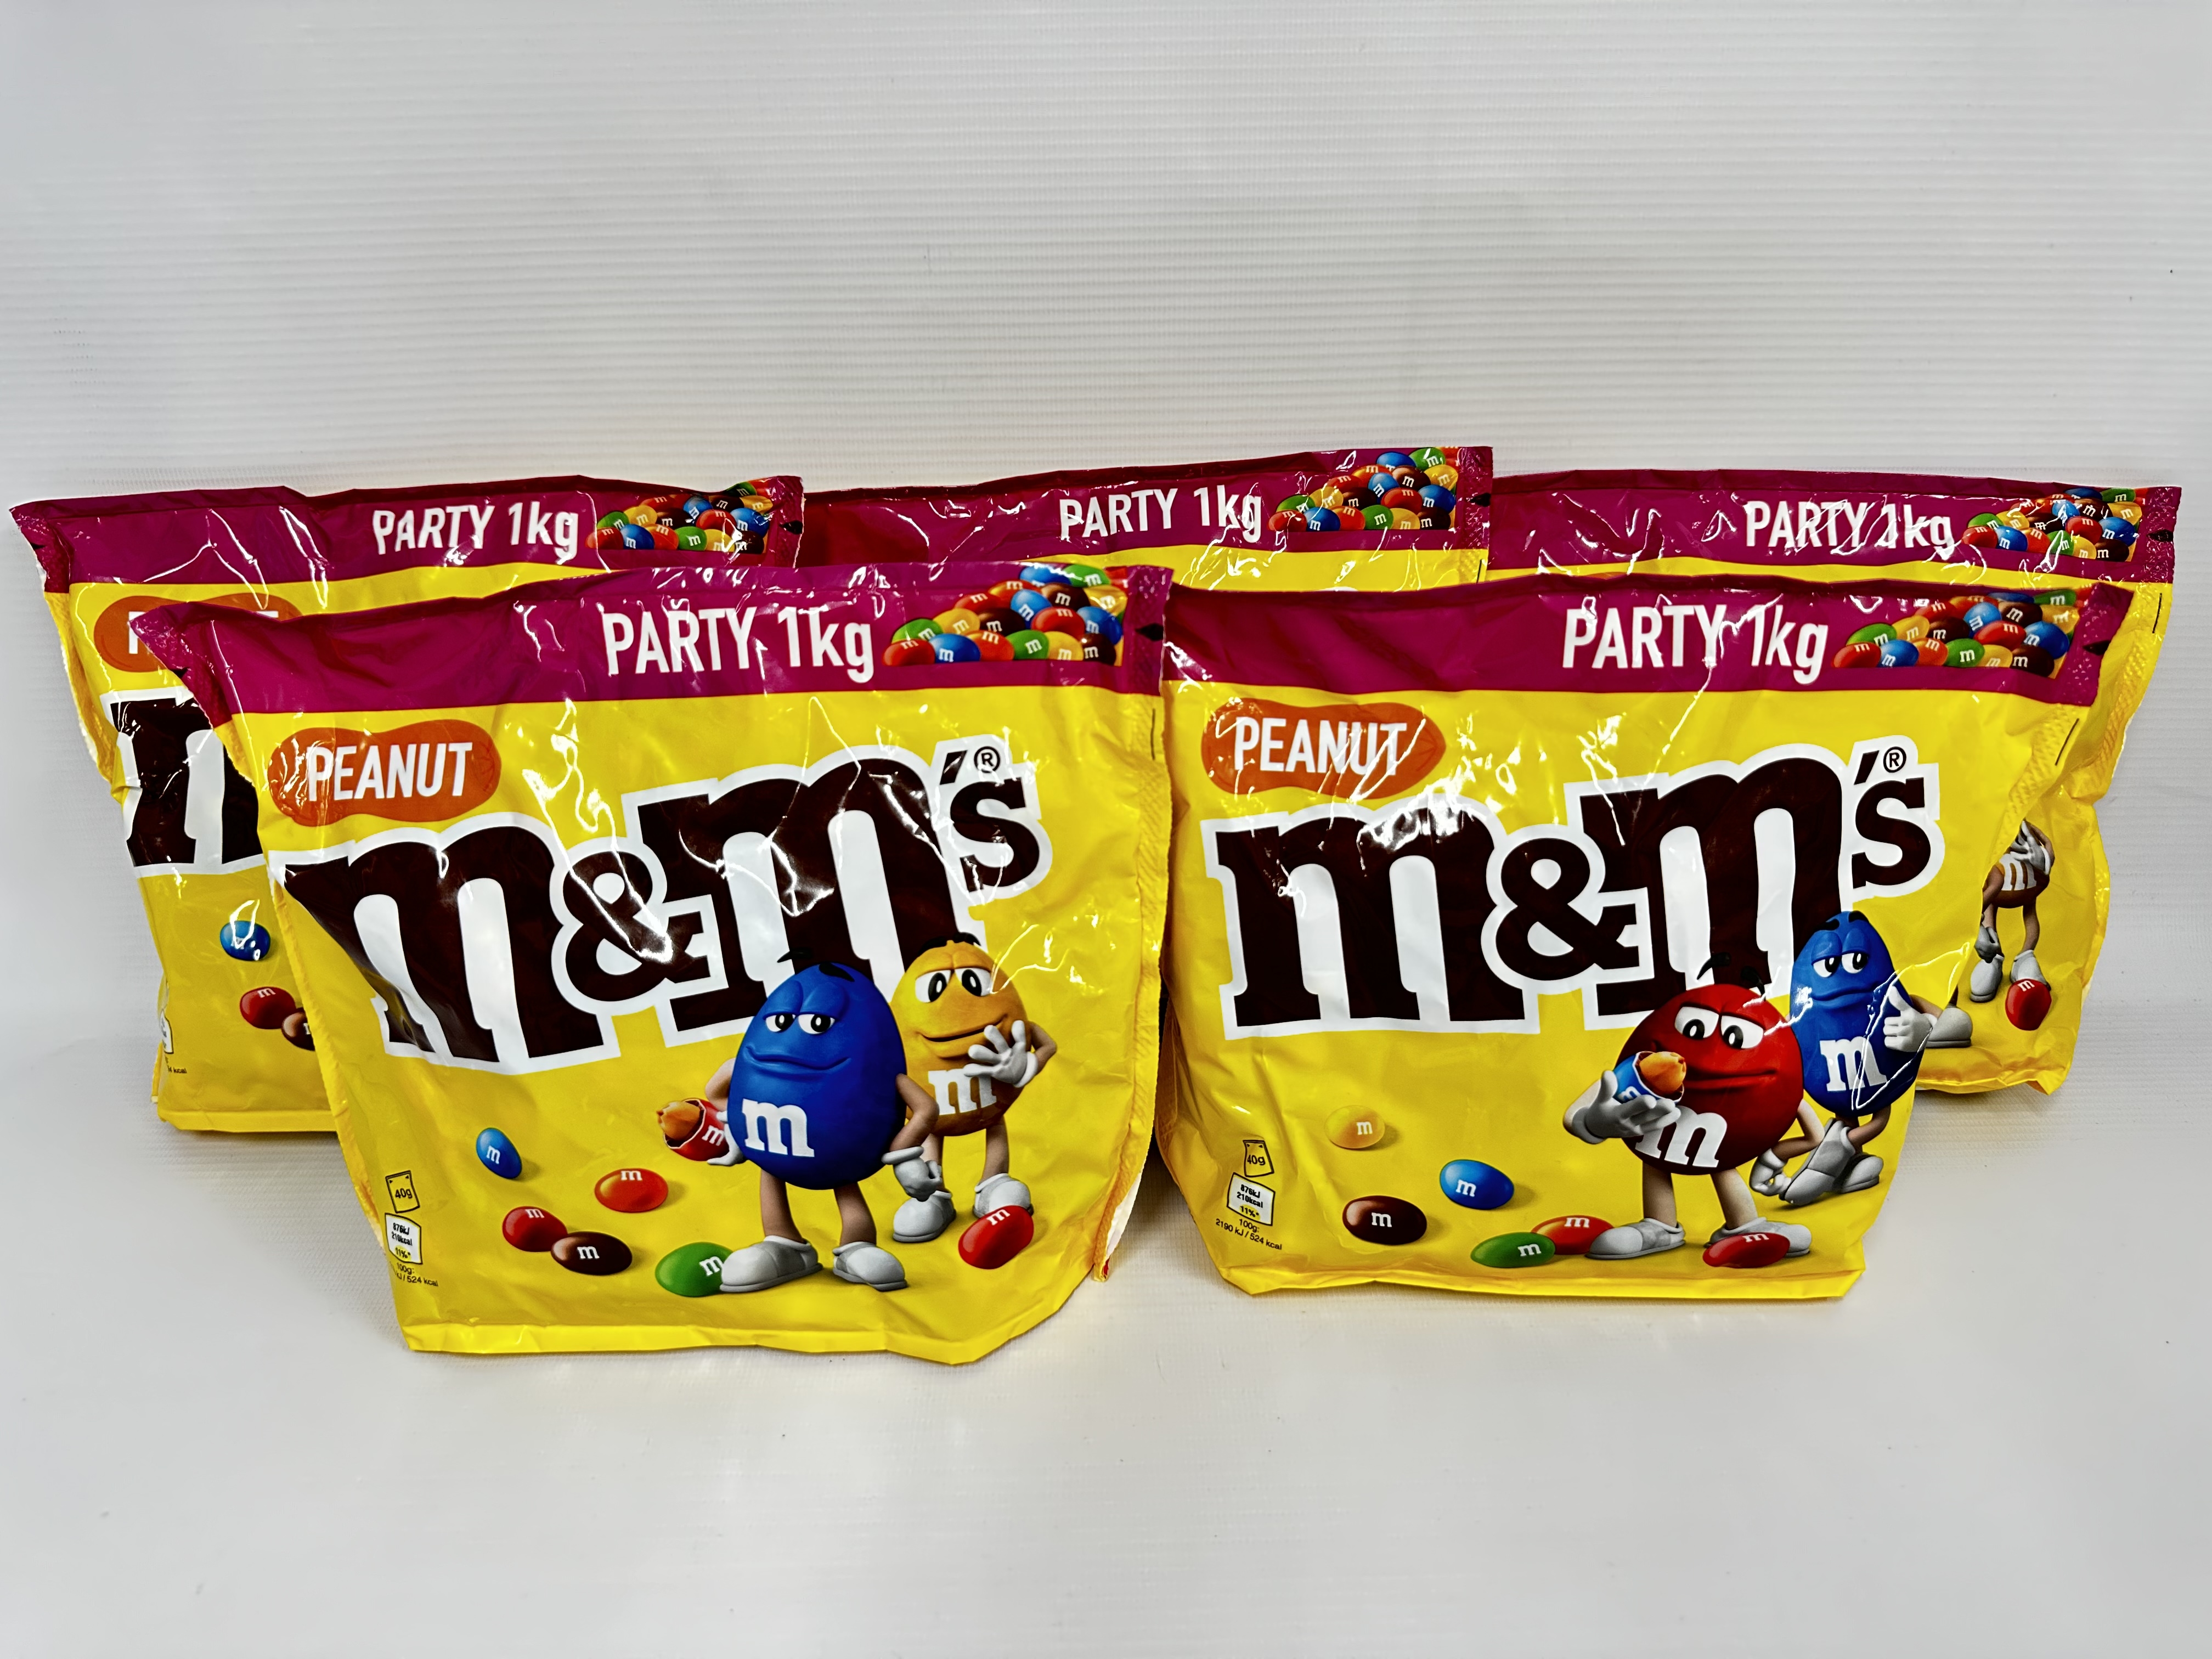 1 kg M&M's UK Party Packs £5 at - Snack News & Reviews